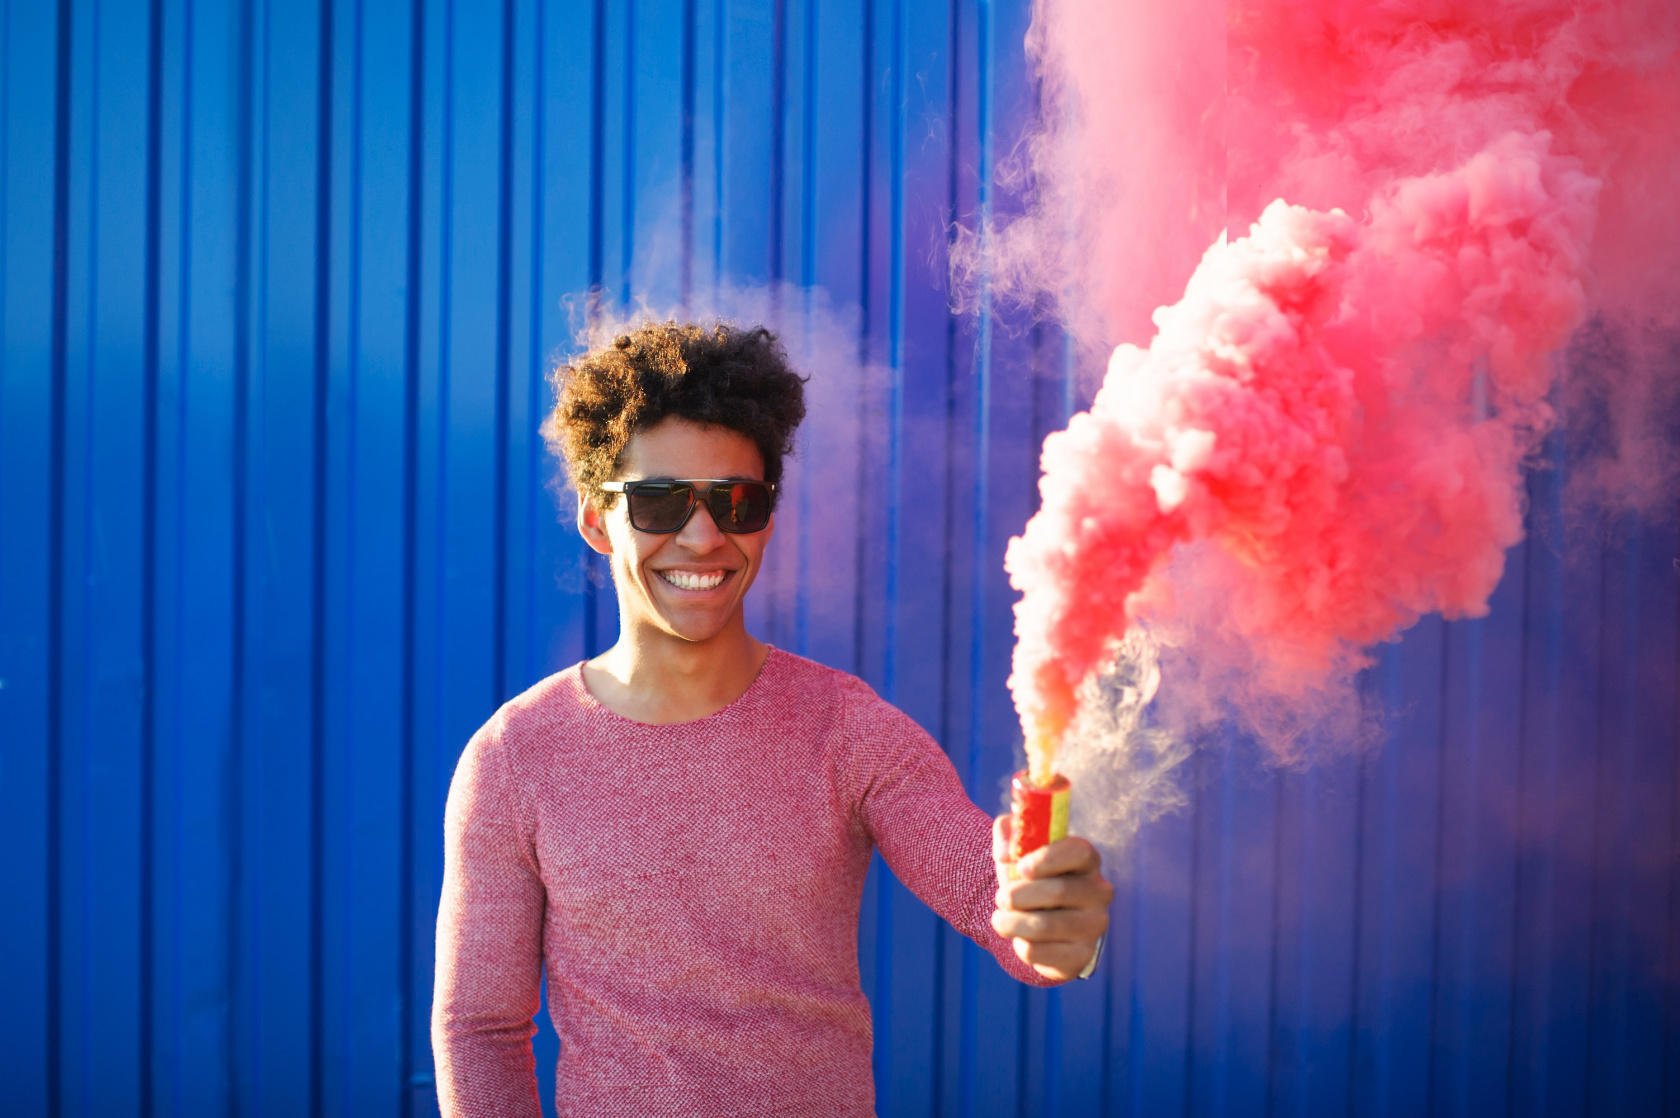 Smoke Bomb Photography You Can Master Quickly and Easily Image8